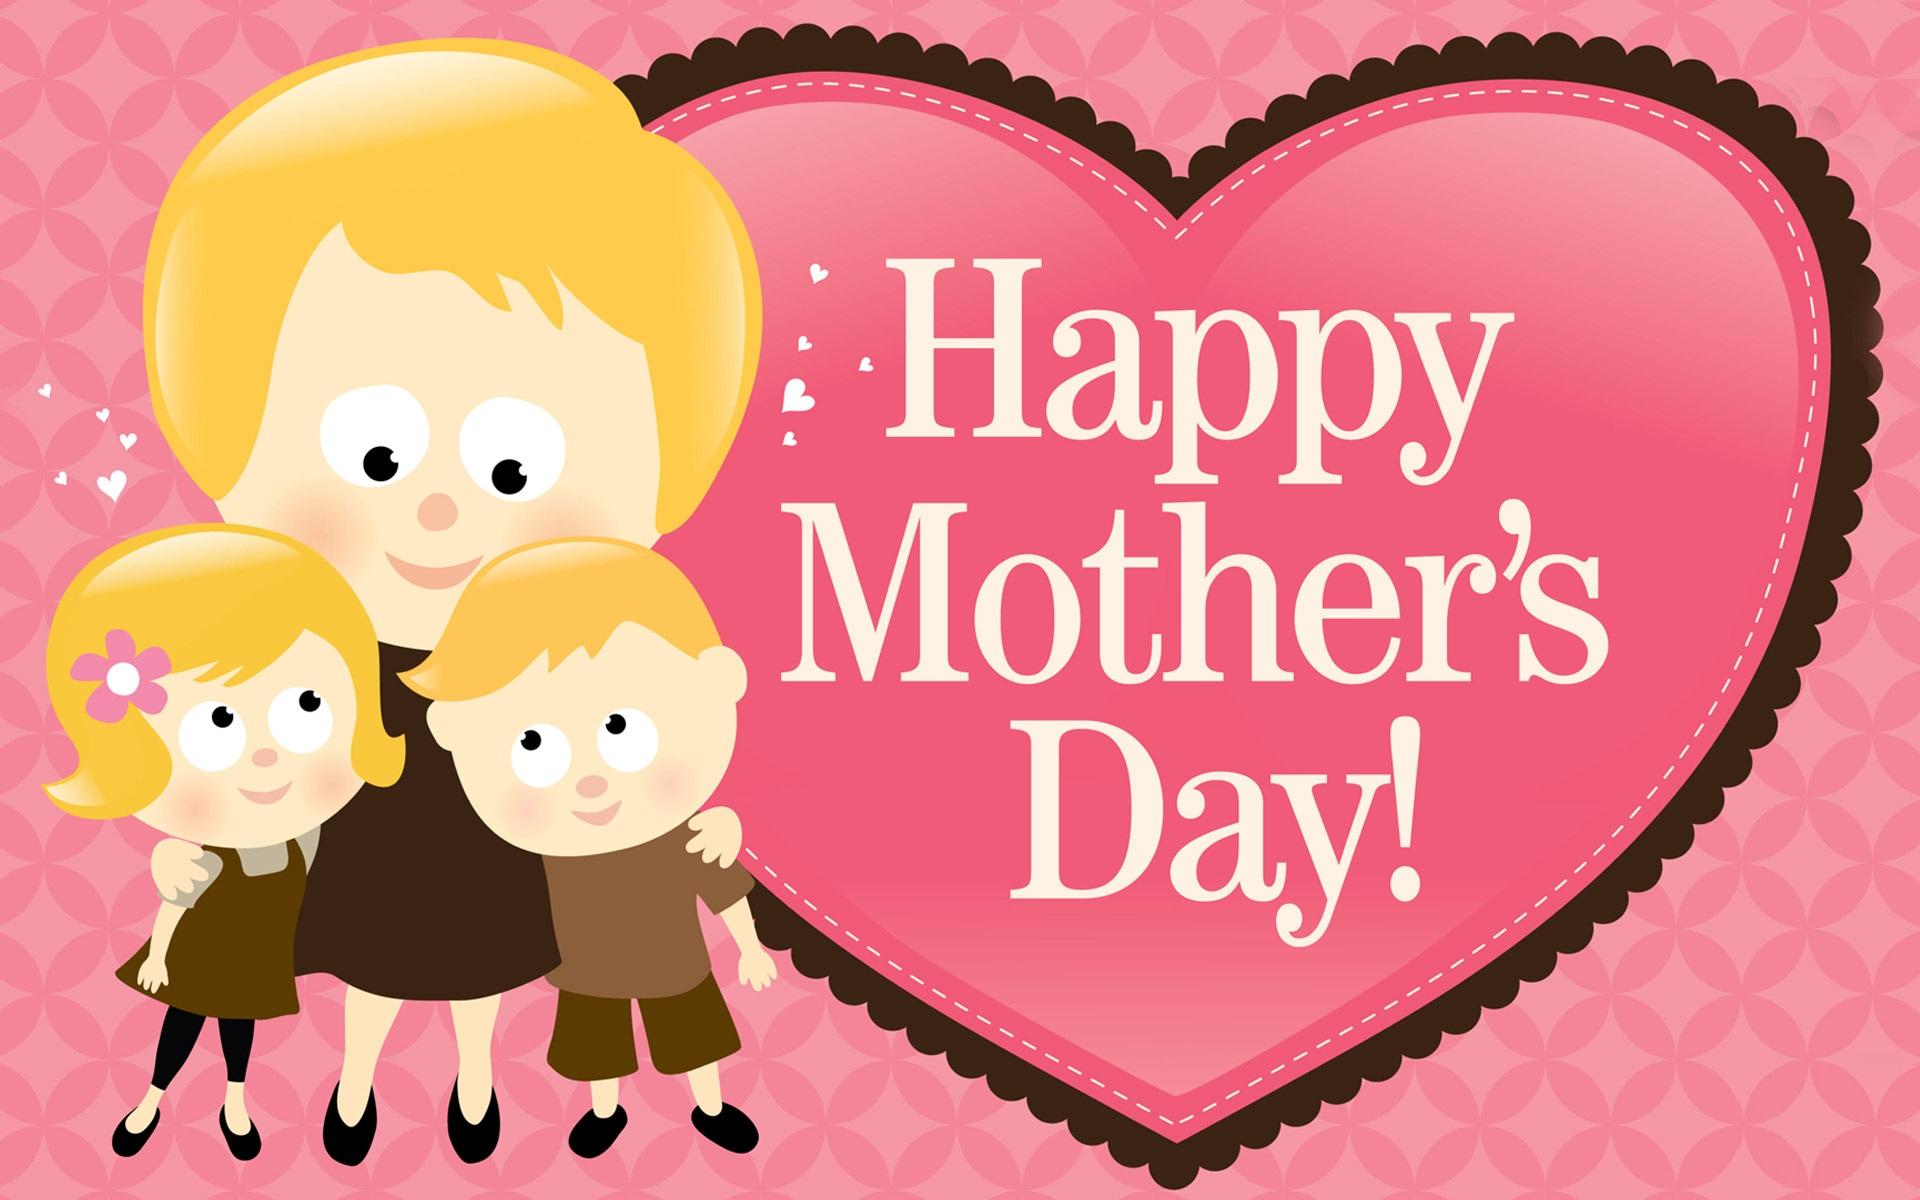 Mothers Day Card Wallpaper High Definition